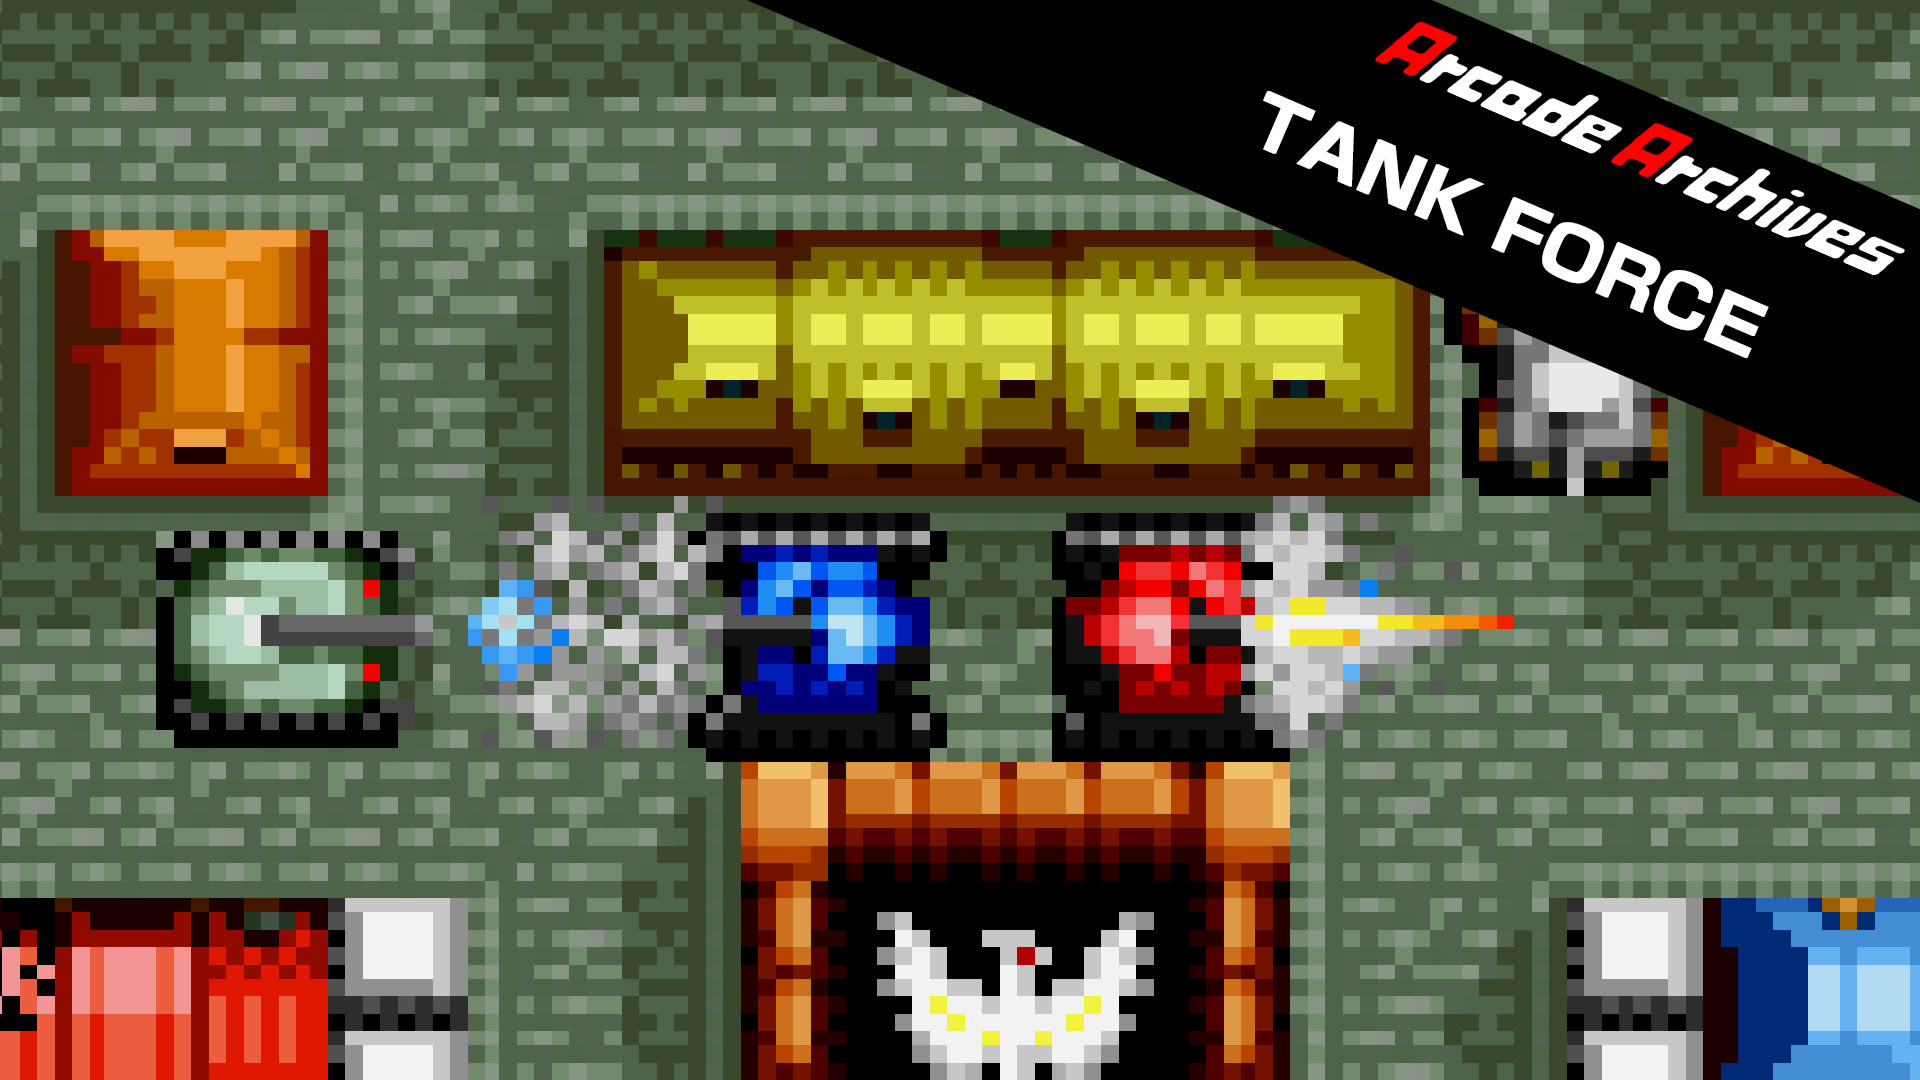 Arcade Archives TANK FORCE